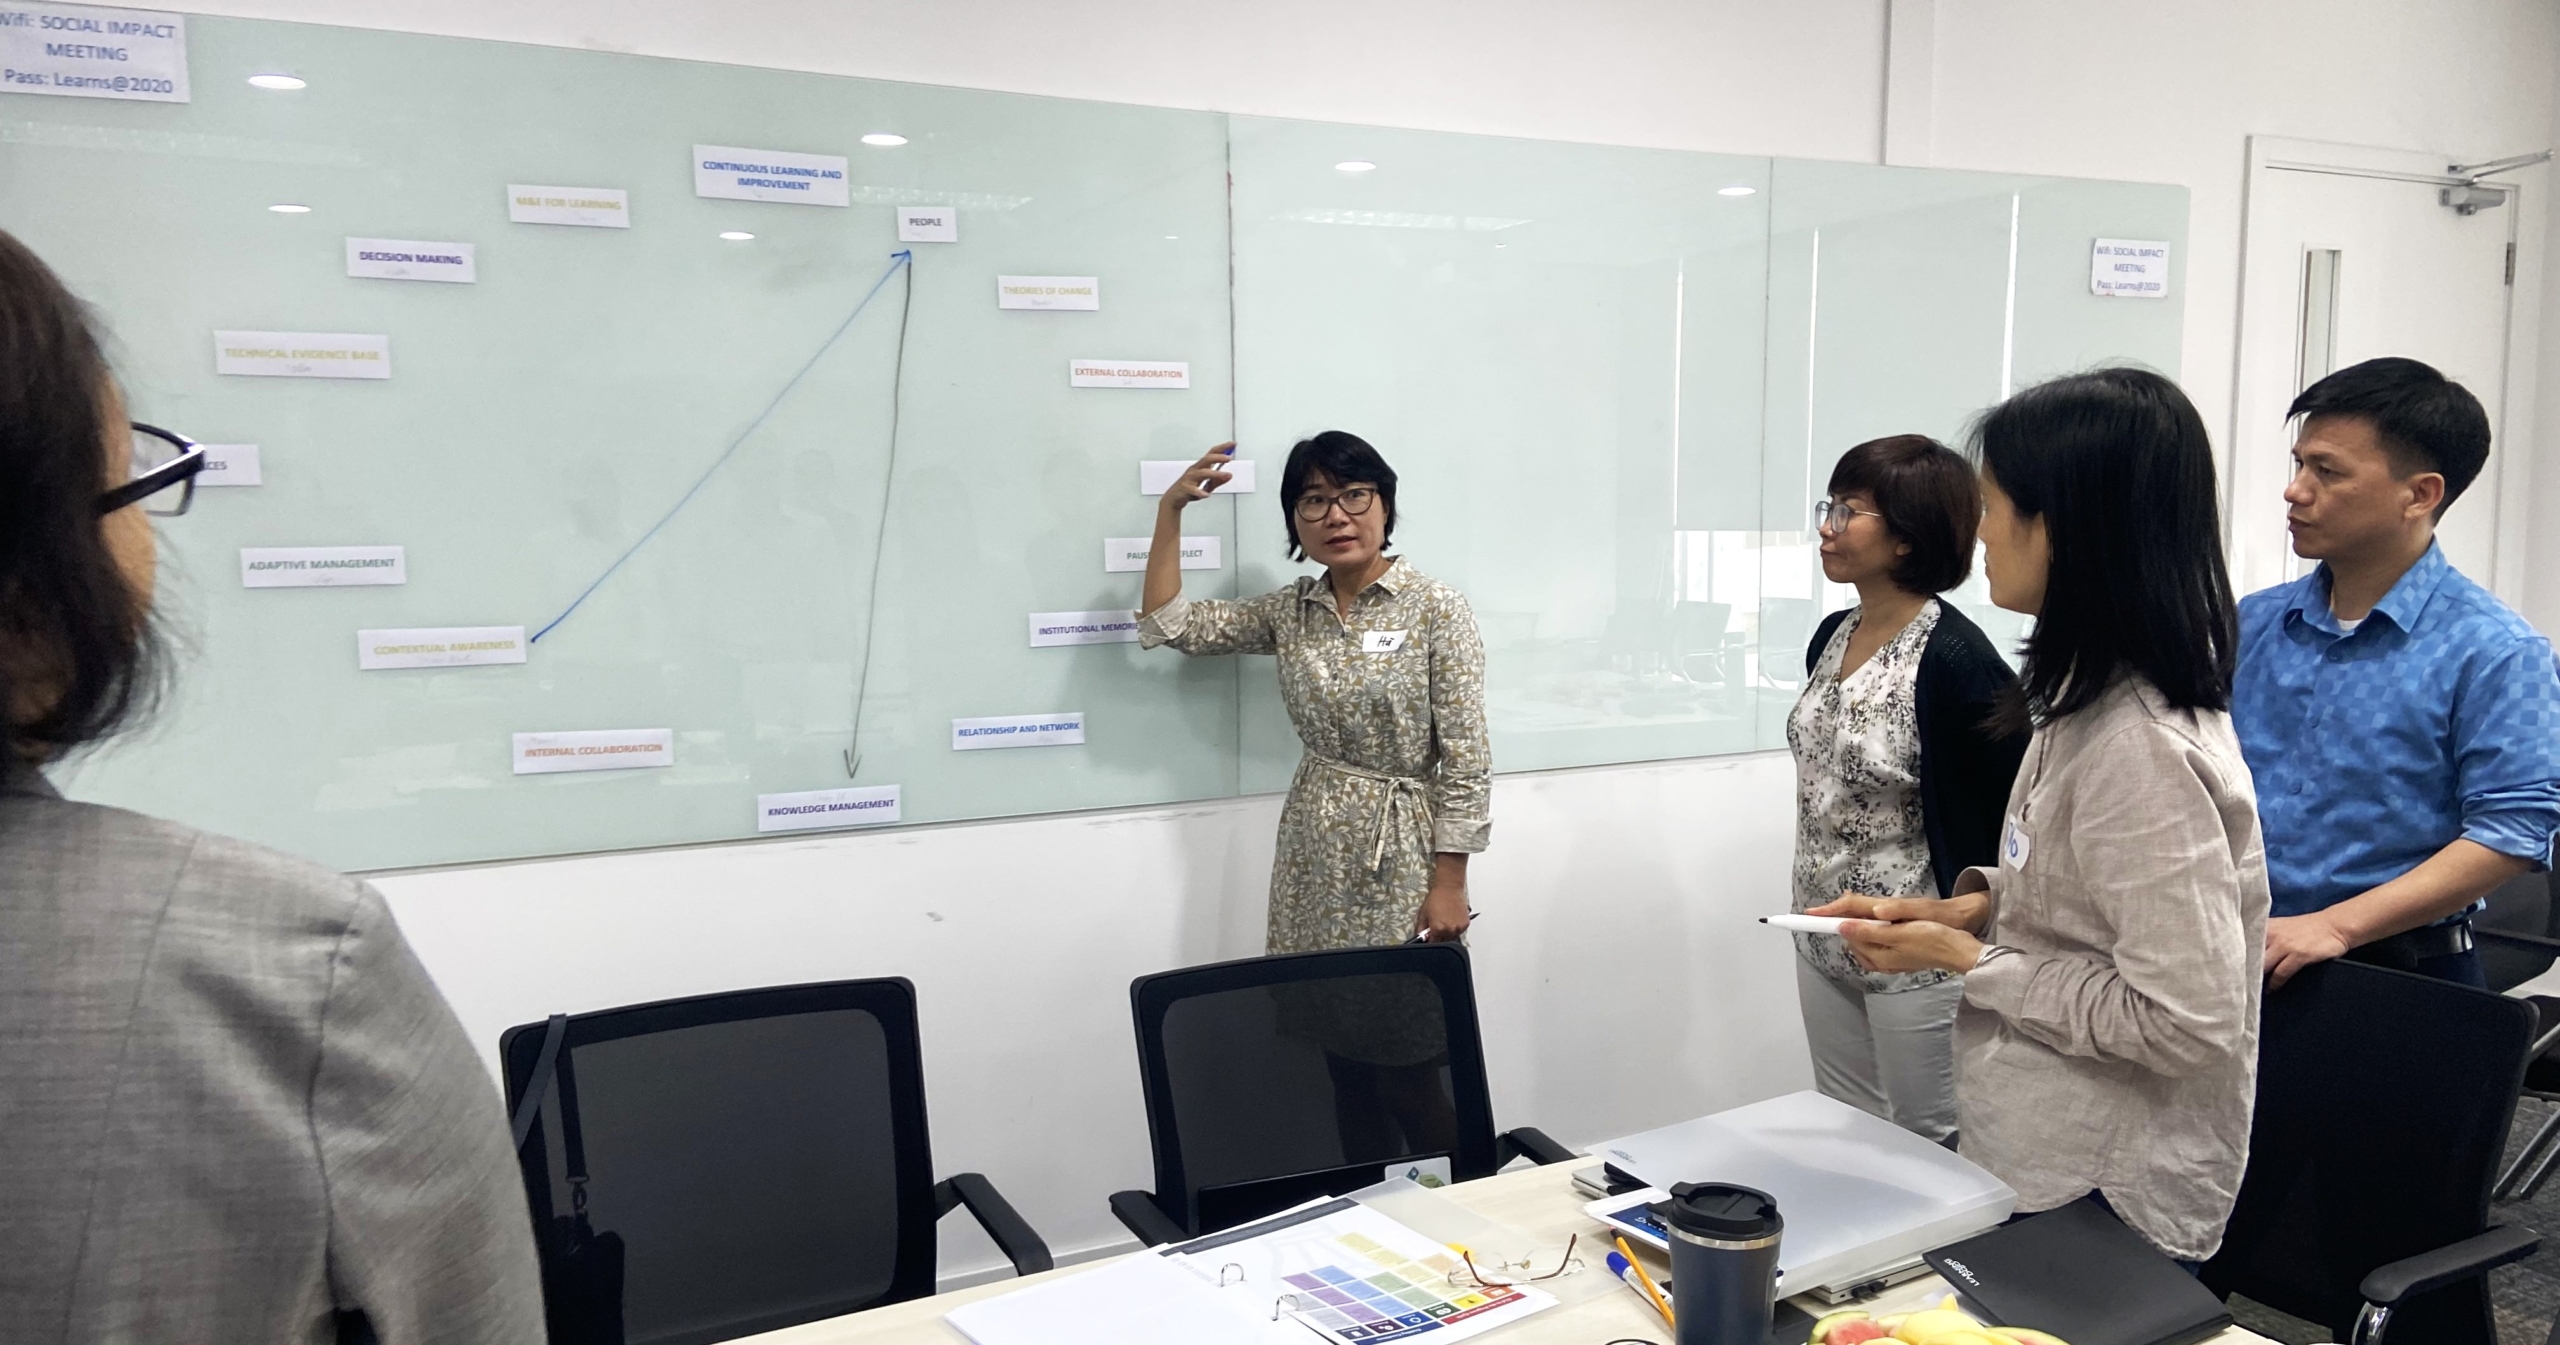 Localization in Focus: Why Facilitation Matters to International Development Thumbnail